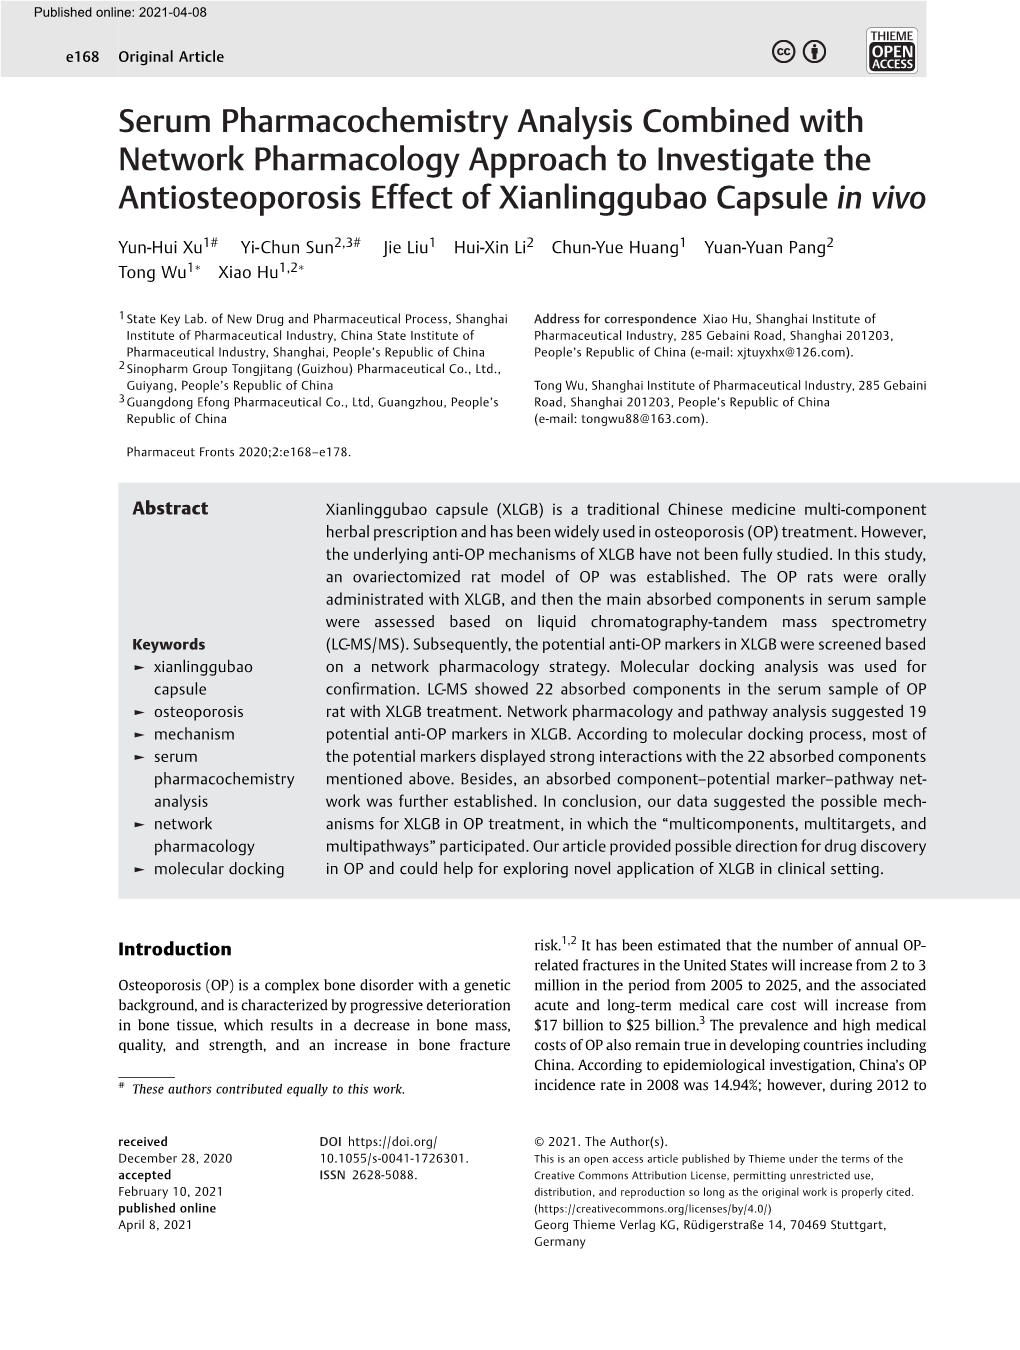 Serum Pharmacochemistry Analysis Combined with Network Pharmacology Approach to Investigate the Antiosteoporosis Effect of Xianlinggubao Capsule in Vivo